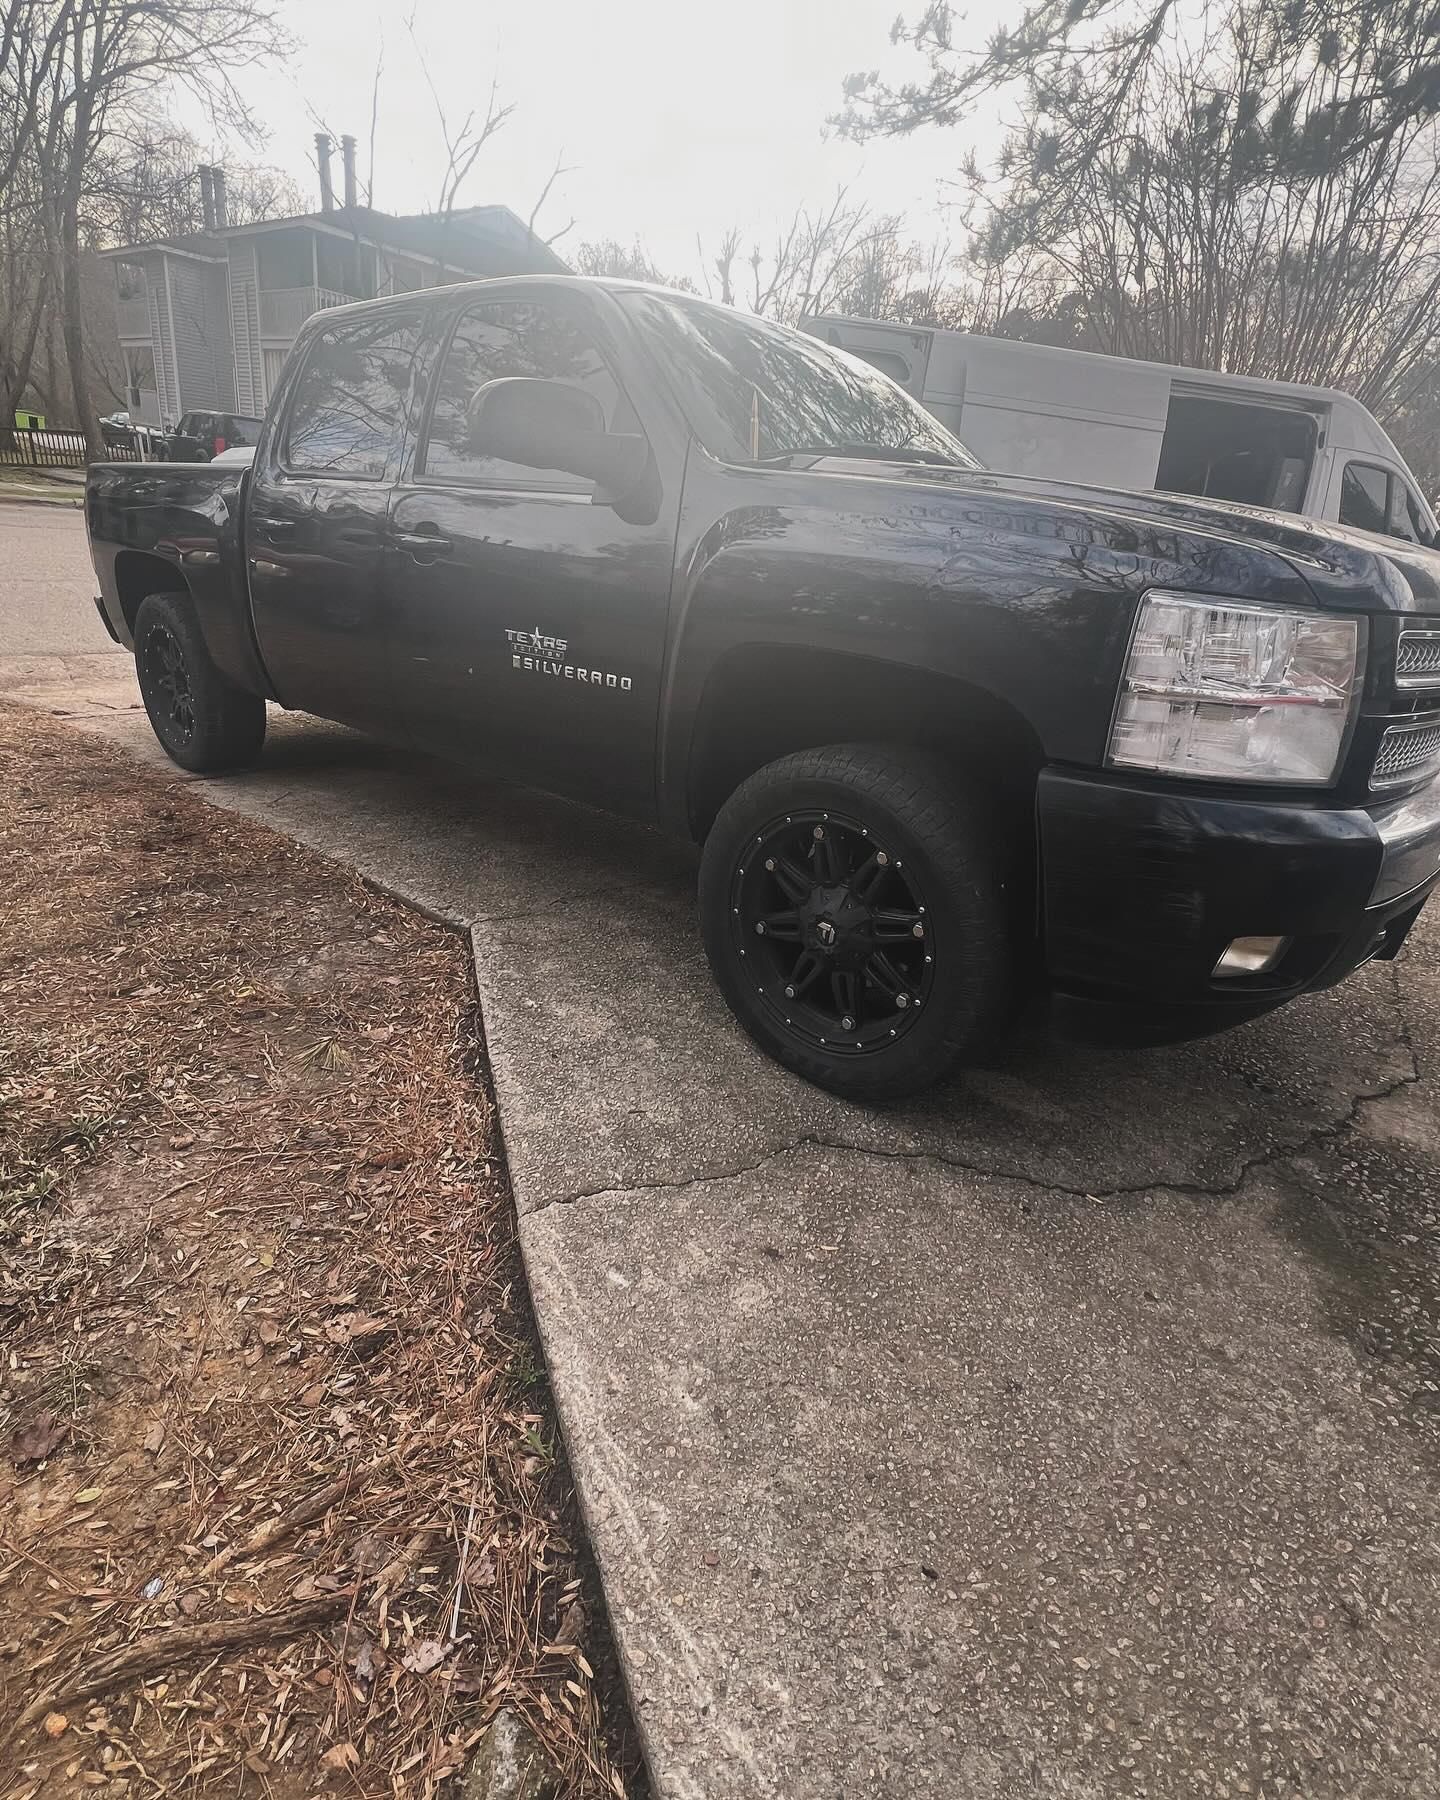  for Limelight Mobile Detailing LLC in Raleigh, NC